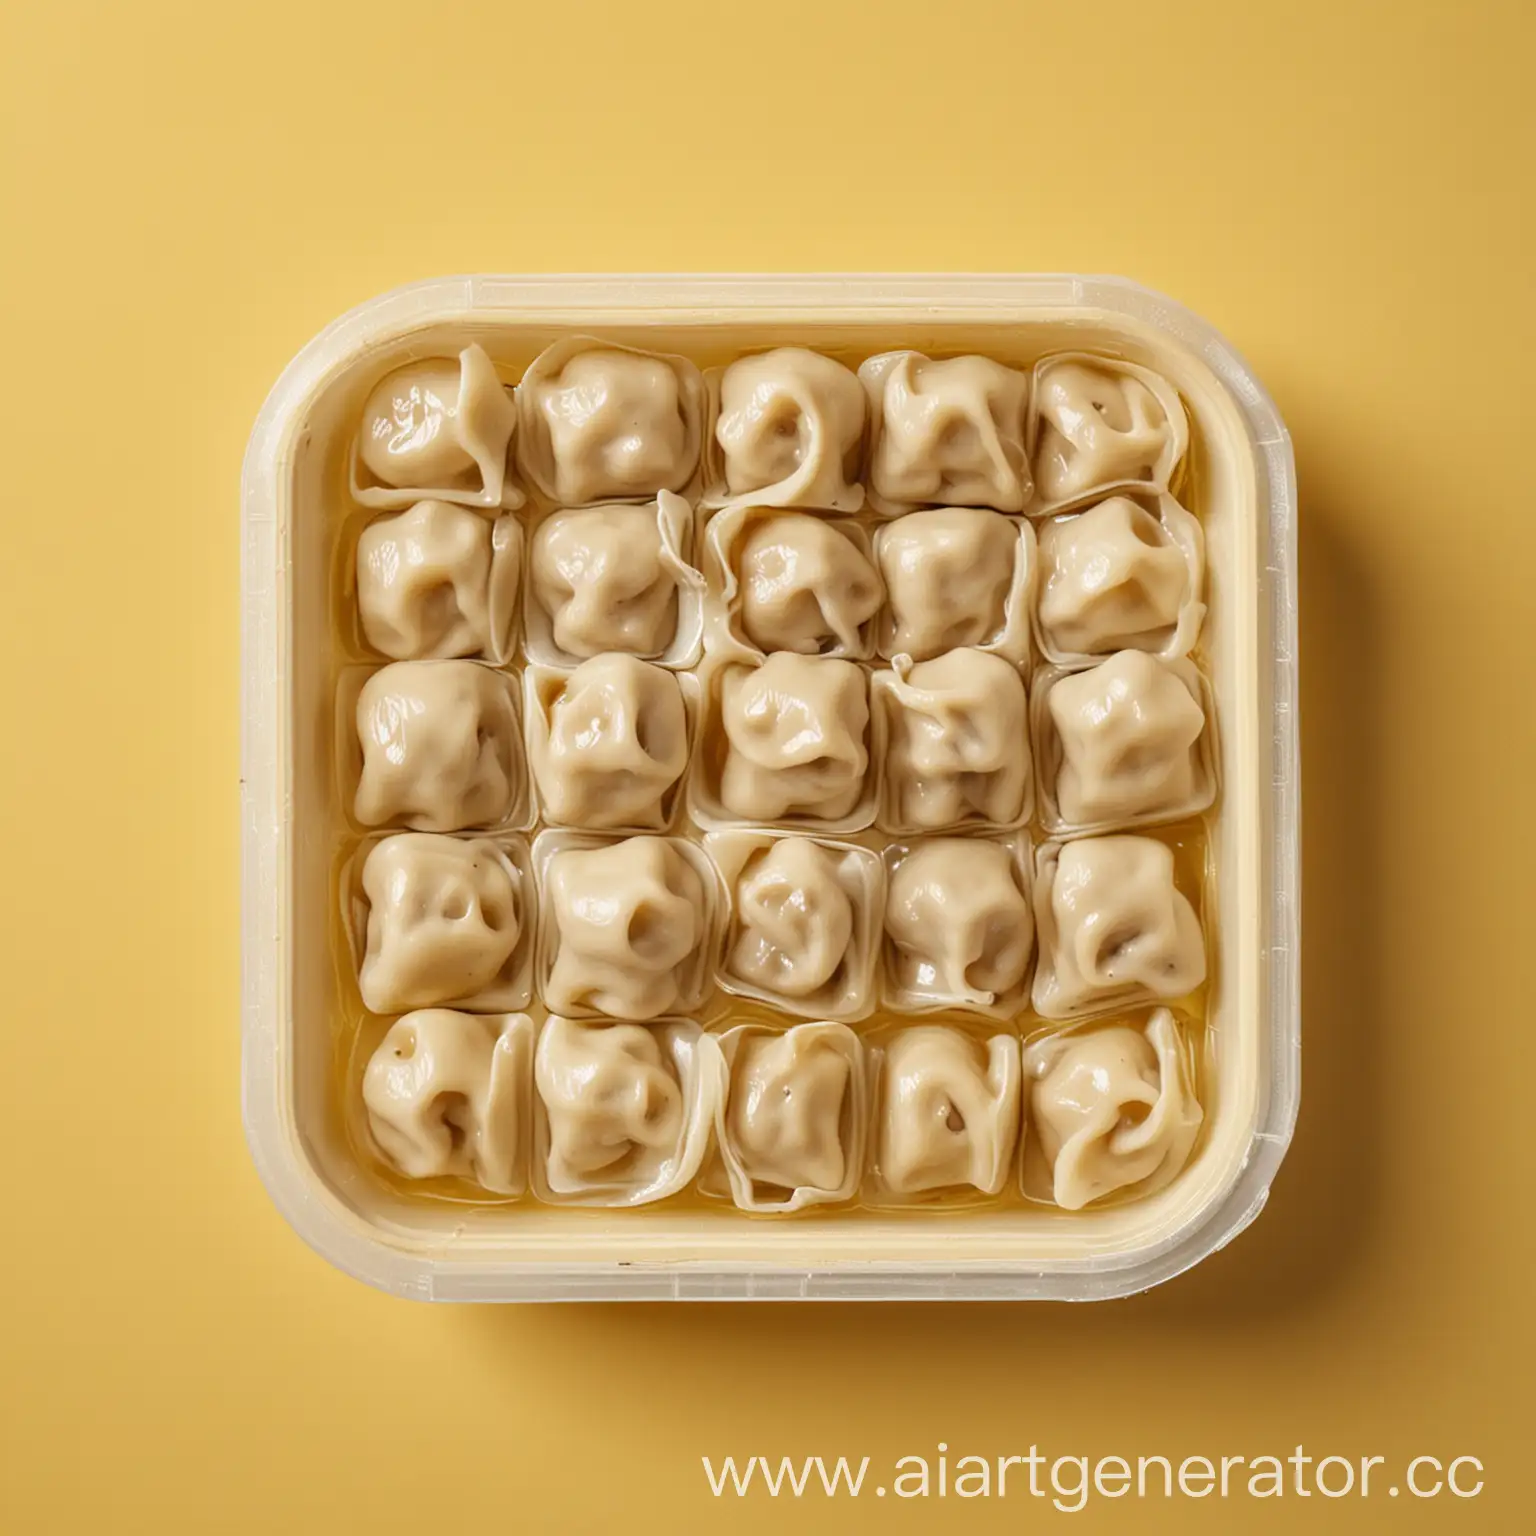 Plastic-Container-with-Pelmeni-on-Ice-Cubes-Vibrant-Culinary-Presentation-on-Yellow-Background